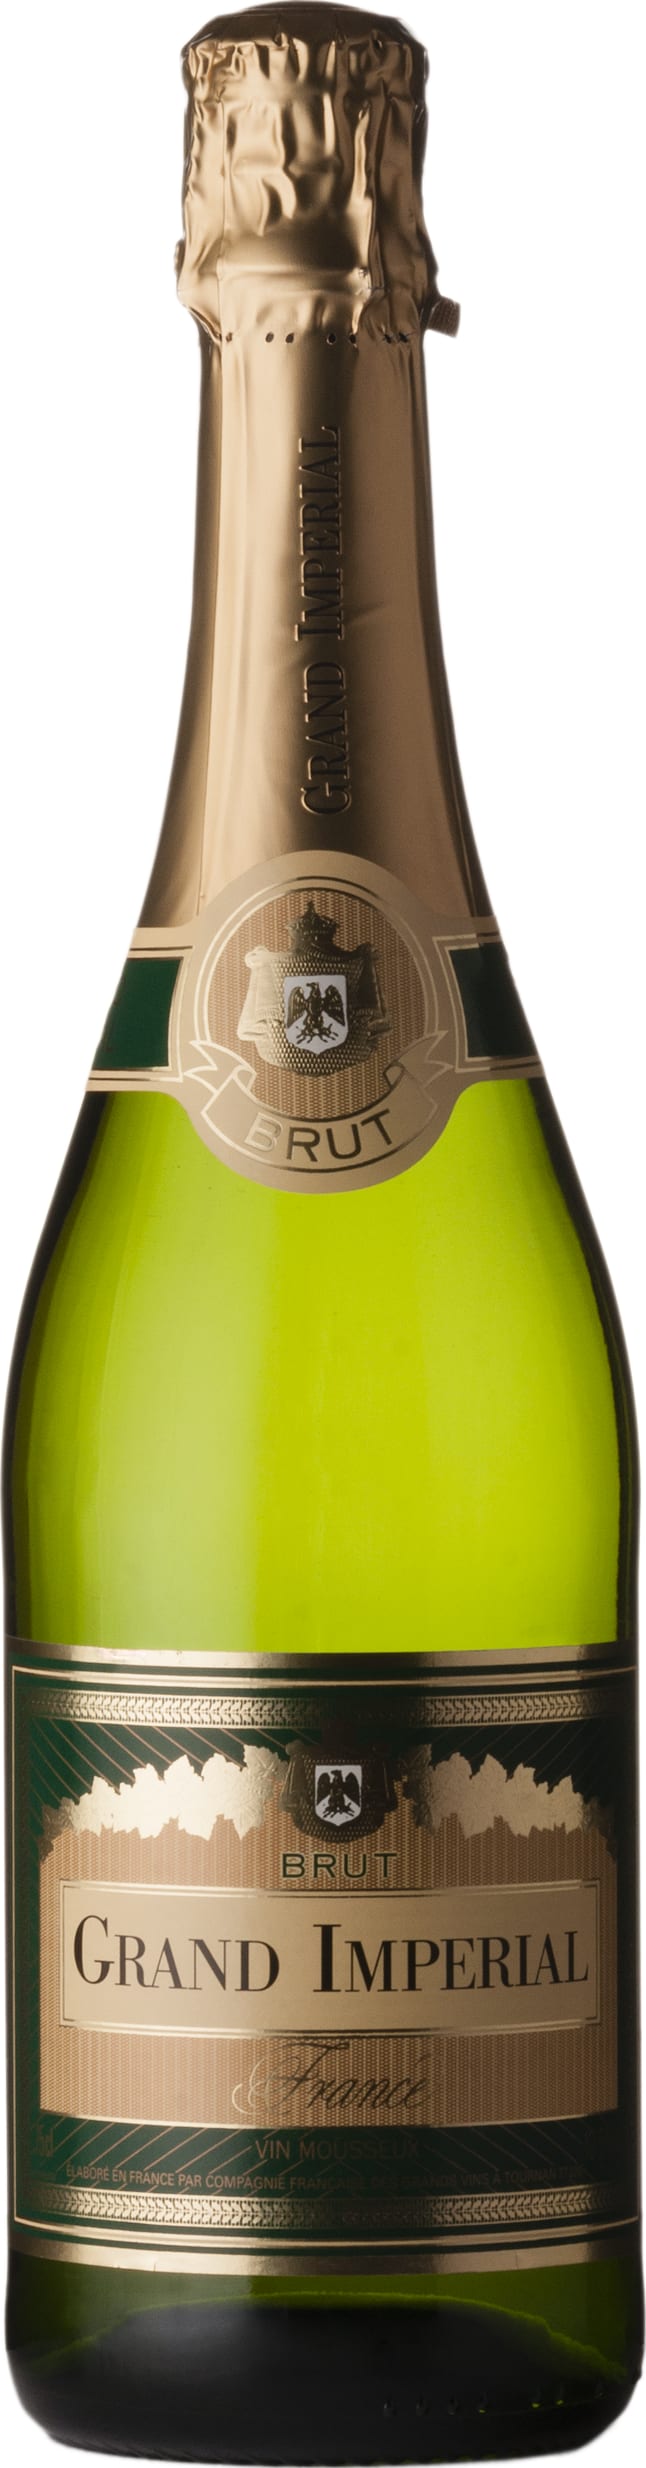 Grand Imperial French Sparkling 75cl NV - Buy Grand Imperial Wines from GREAT WINES DIRECT wine shop